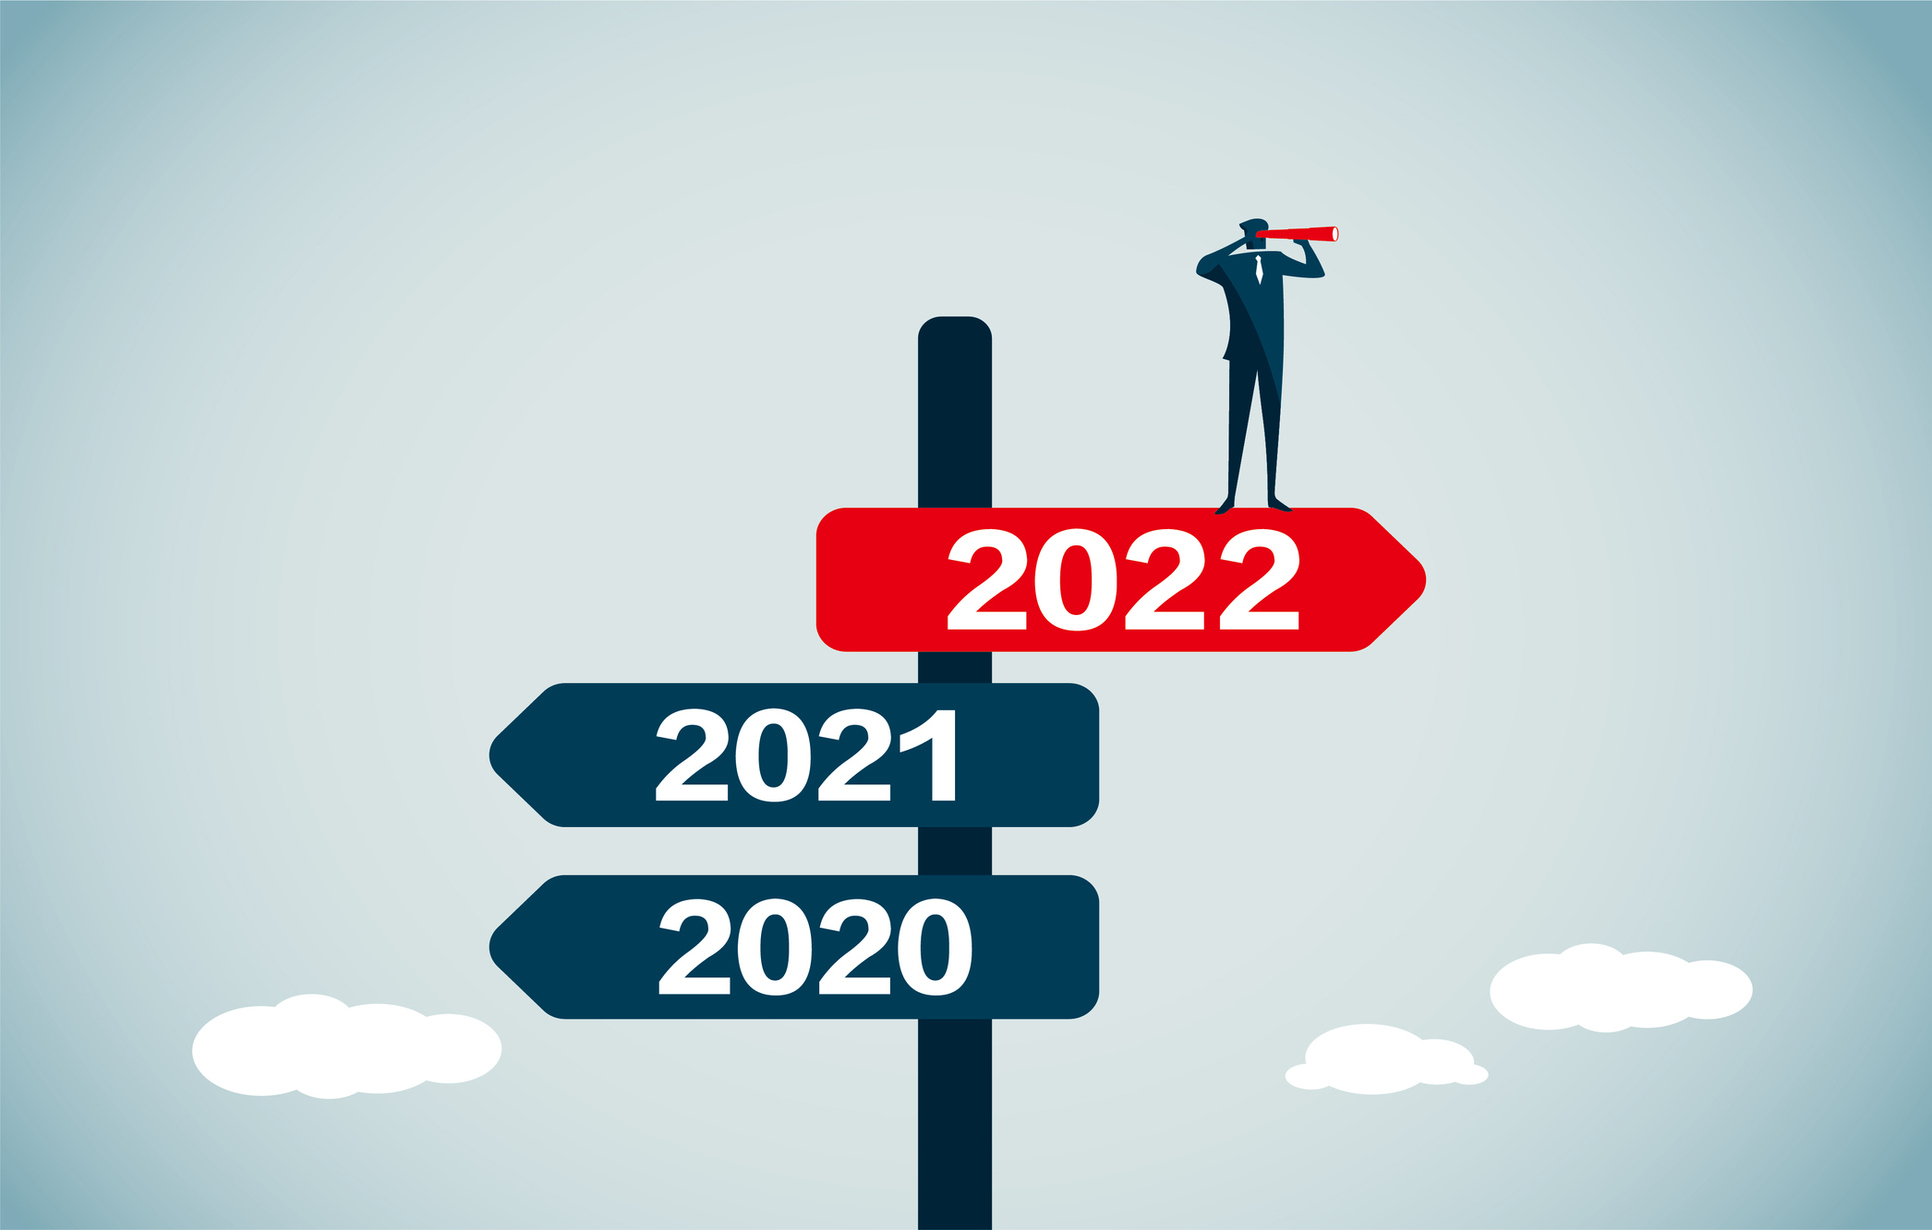 Hot Topics for Boards in 2022